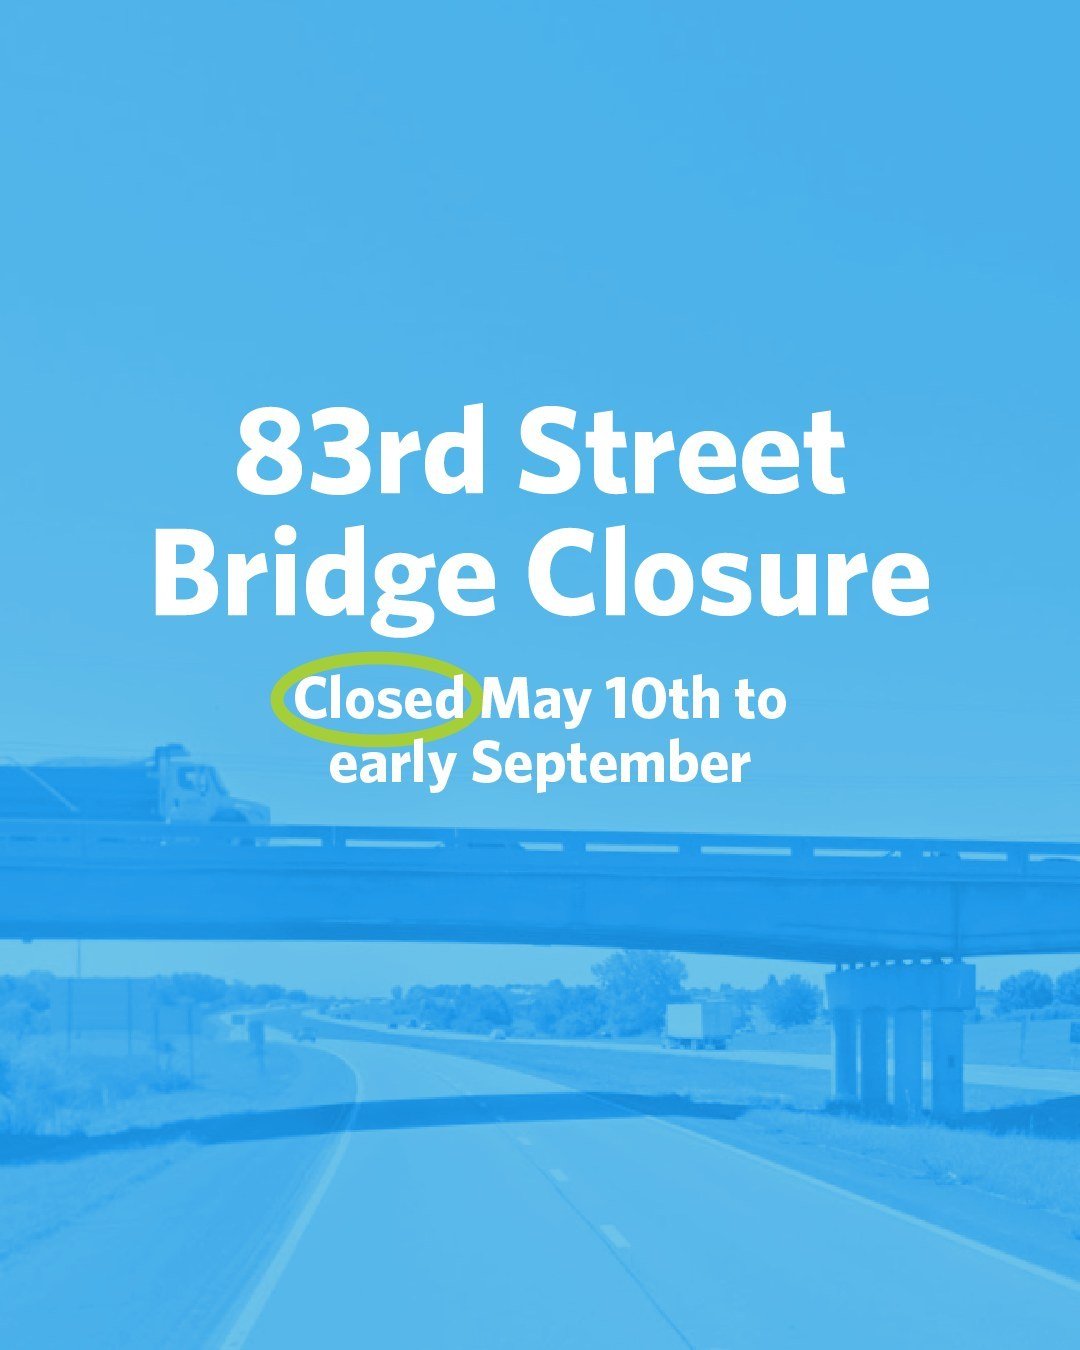 From May 10th to early September the 83rd Street bridge over K7 will be closed for repair. Plan your best route and leave yourself some extra time to get to Westside.
 
From the North / Shawnee
&bull;K7 South, exit onto Prairie Star to take detour to